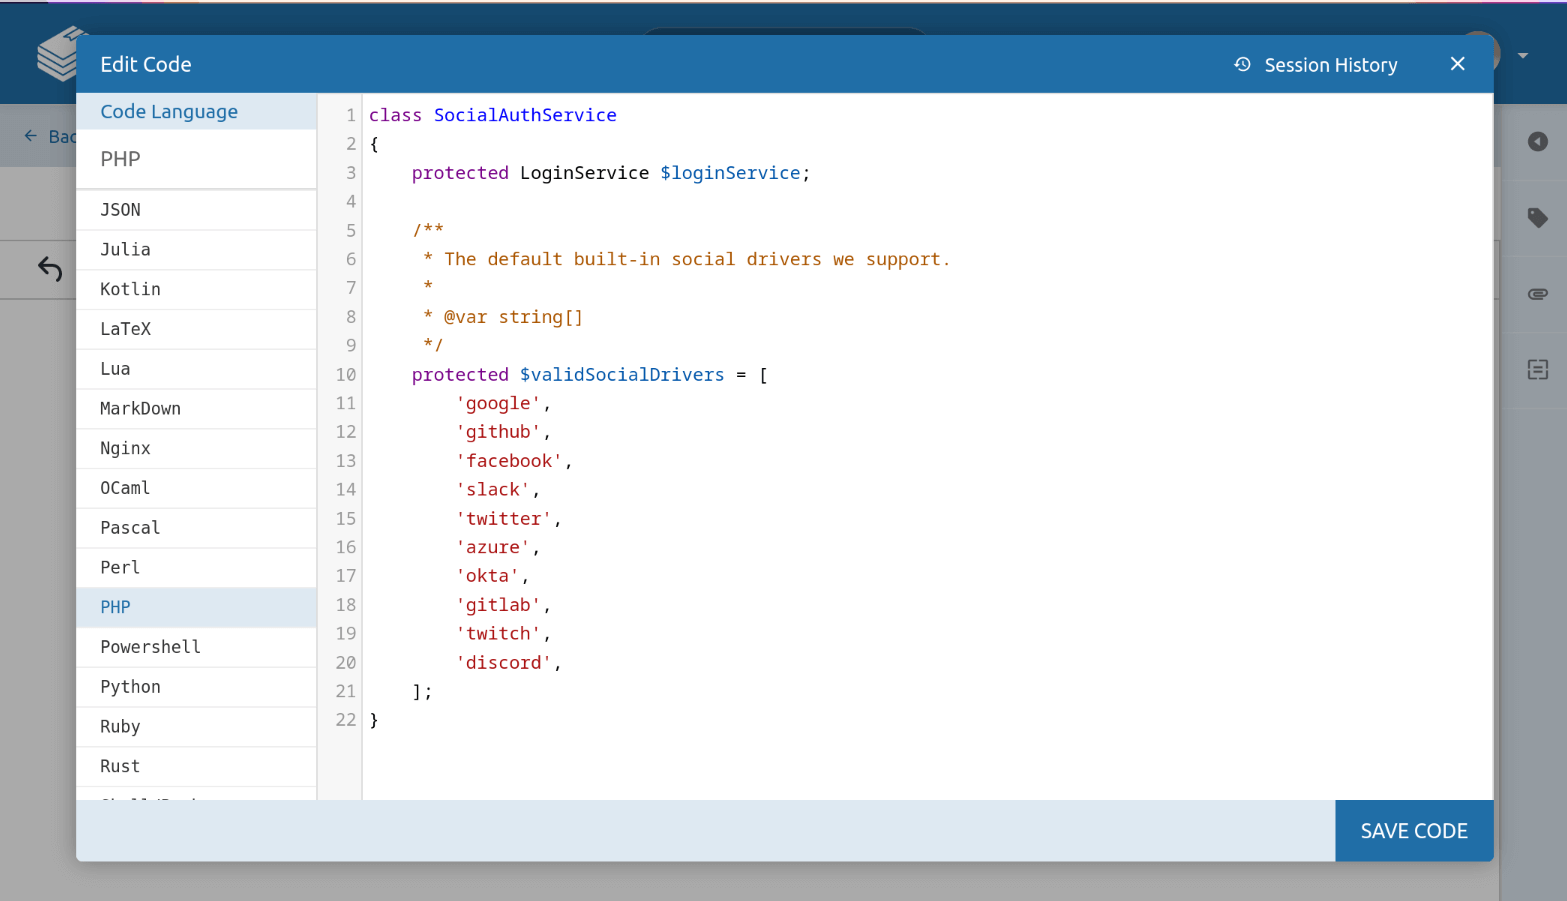 Screenshot of the code editor popup window, with code languages listed down the left